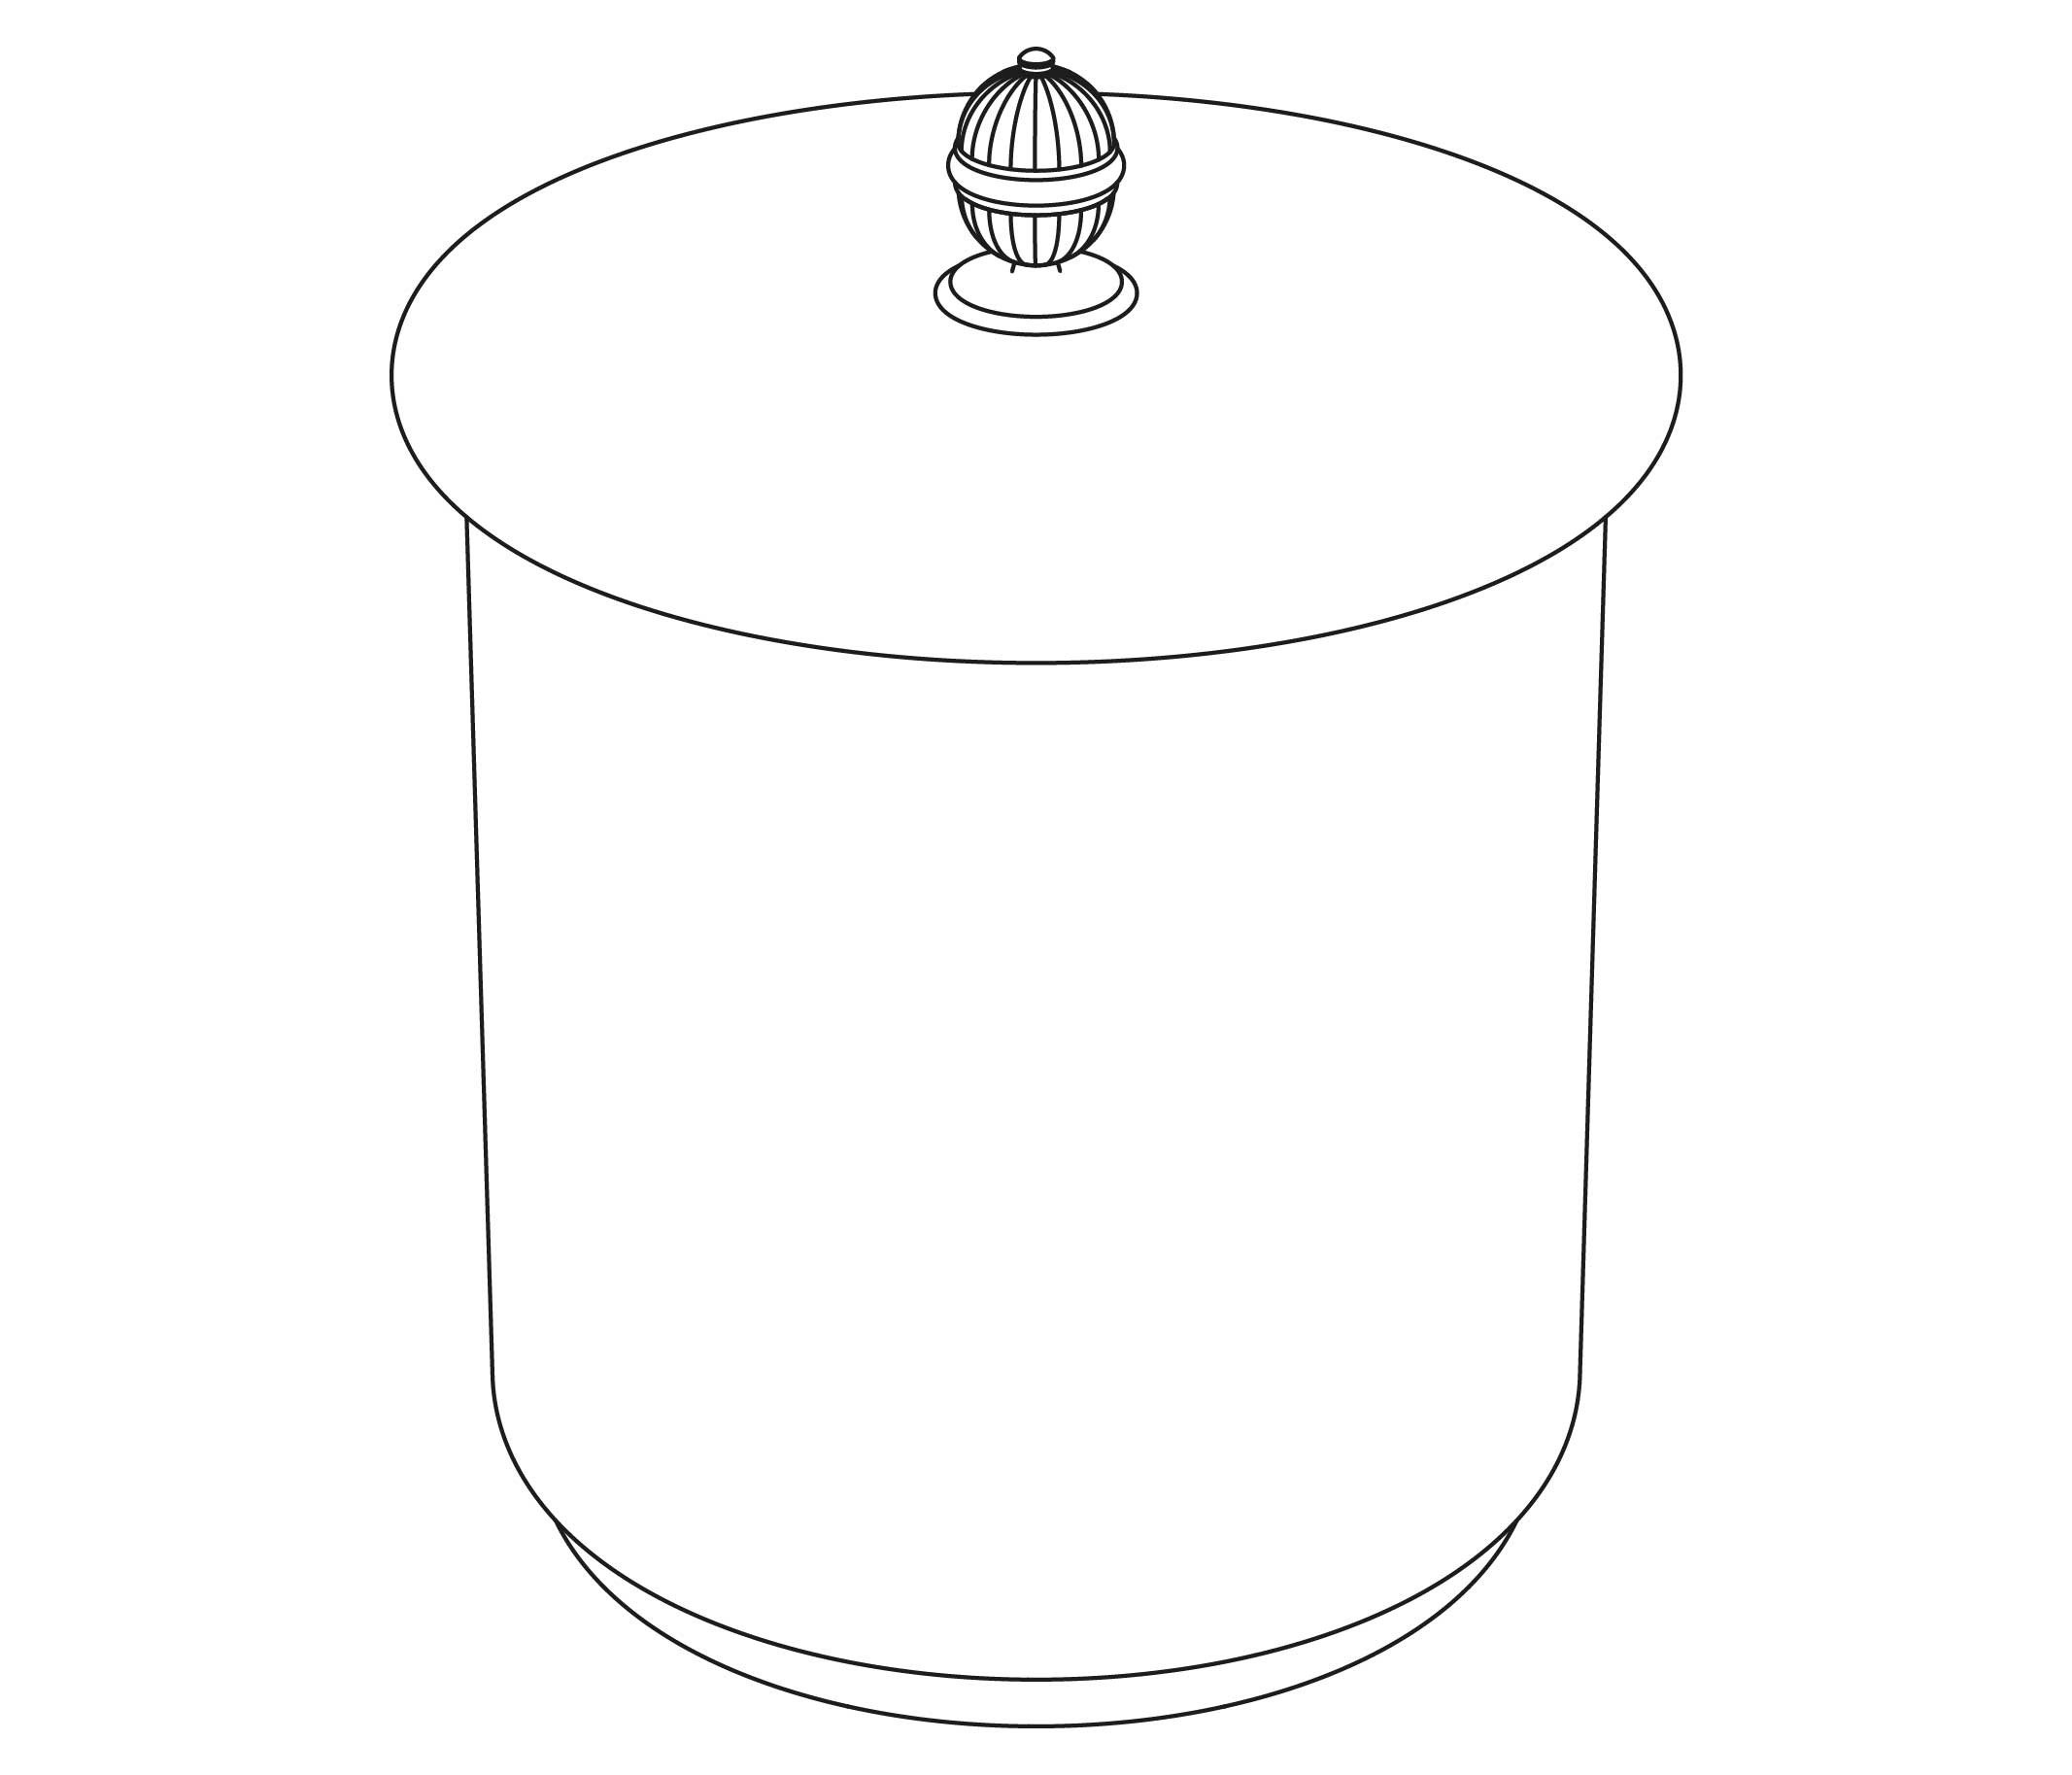 S181-577 Bin with cover